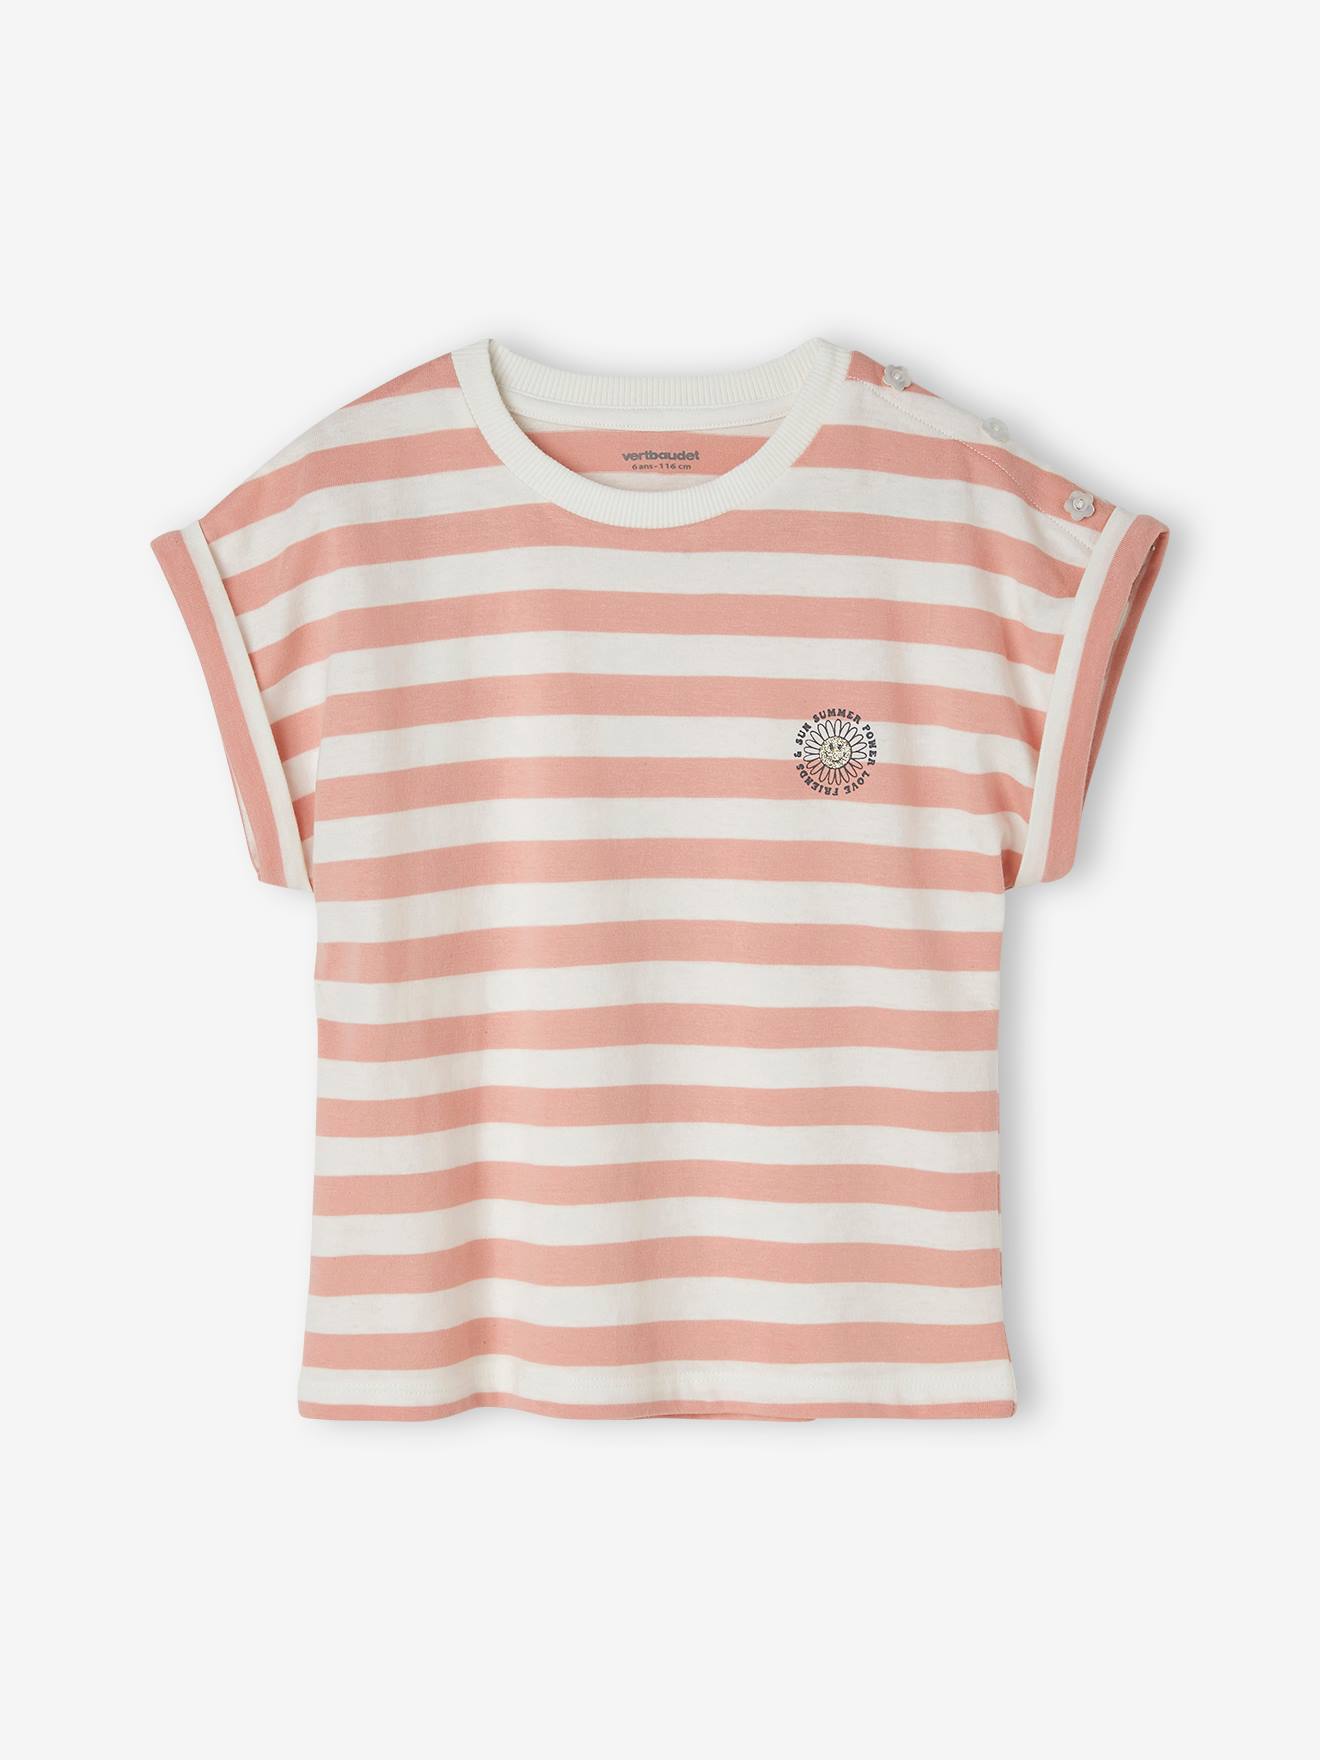 Striped T-Shirt for Girls striped pink